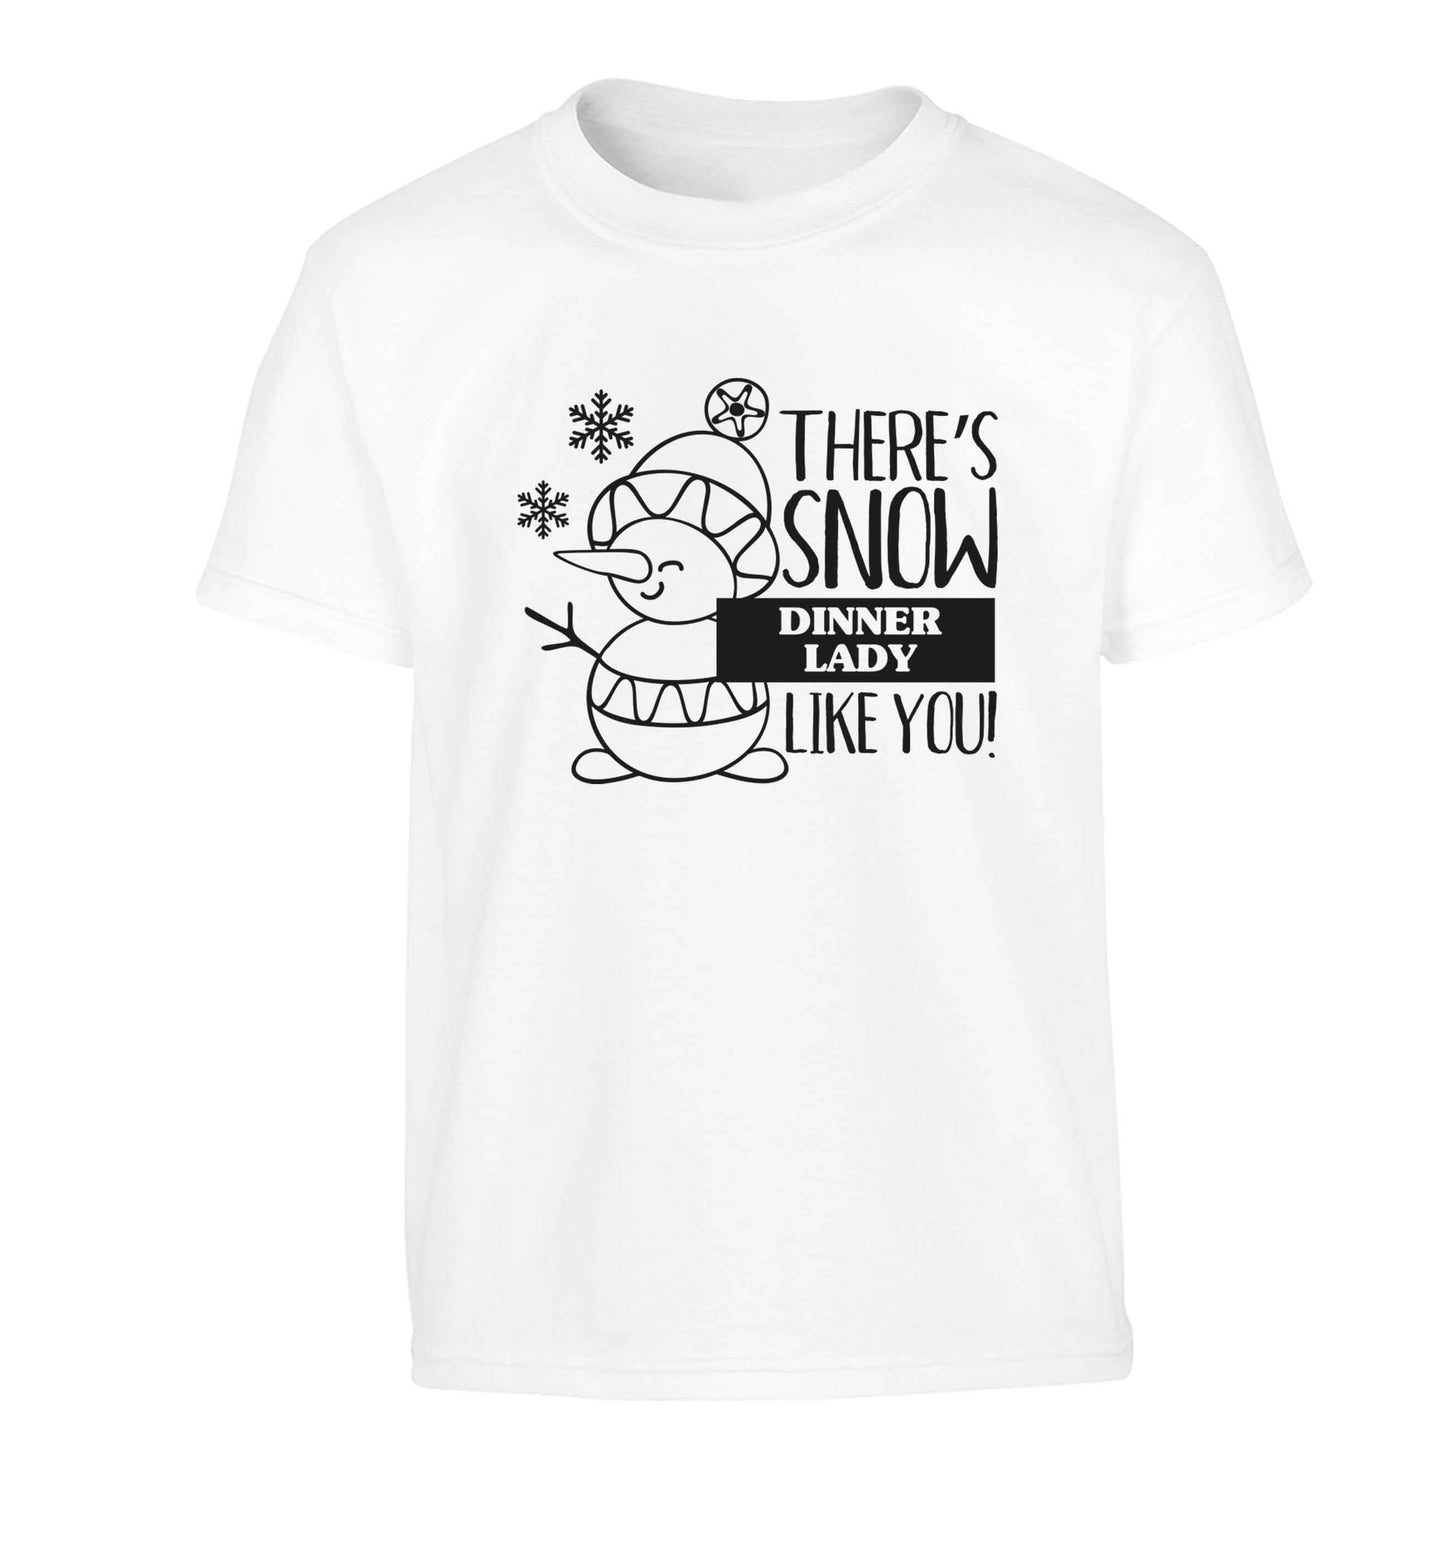 There's snow dinner lady like you Children's white Tshirt 12-13 Years